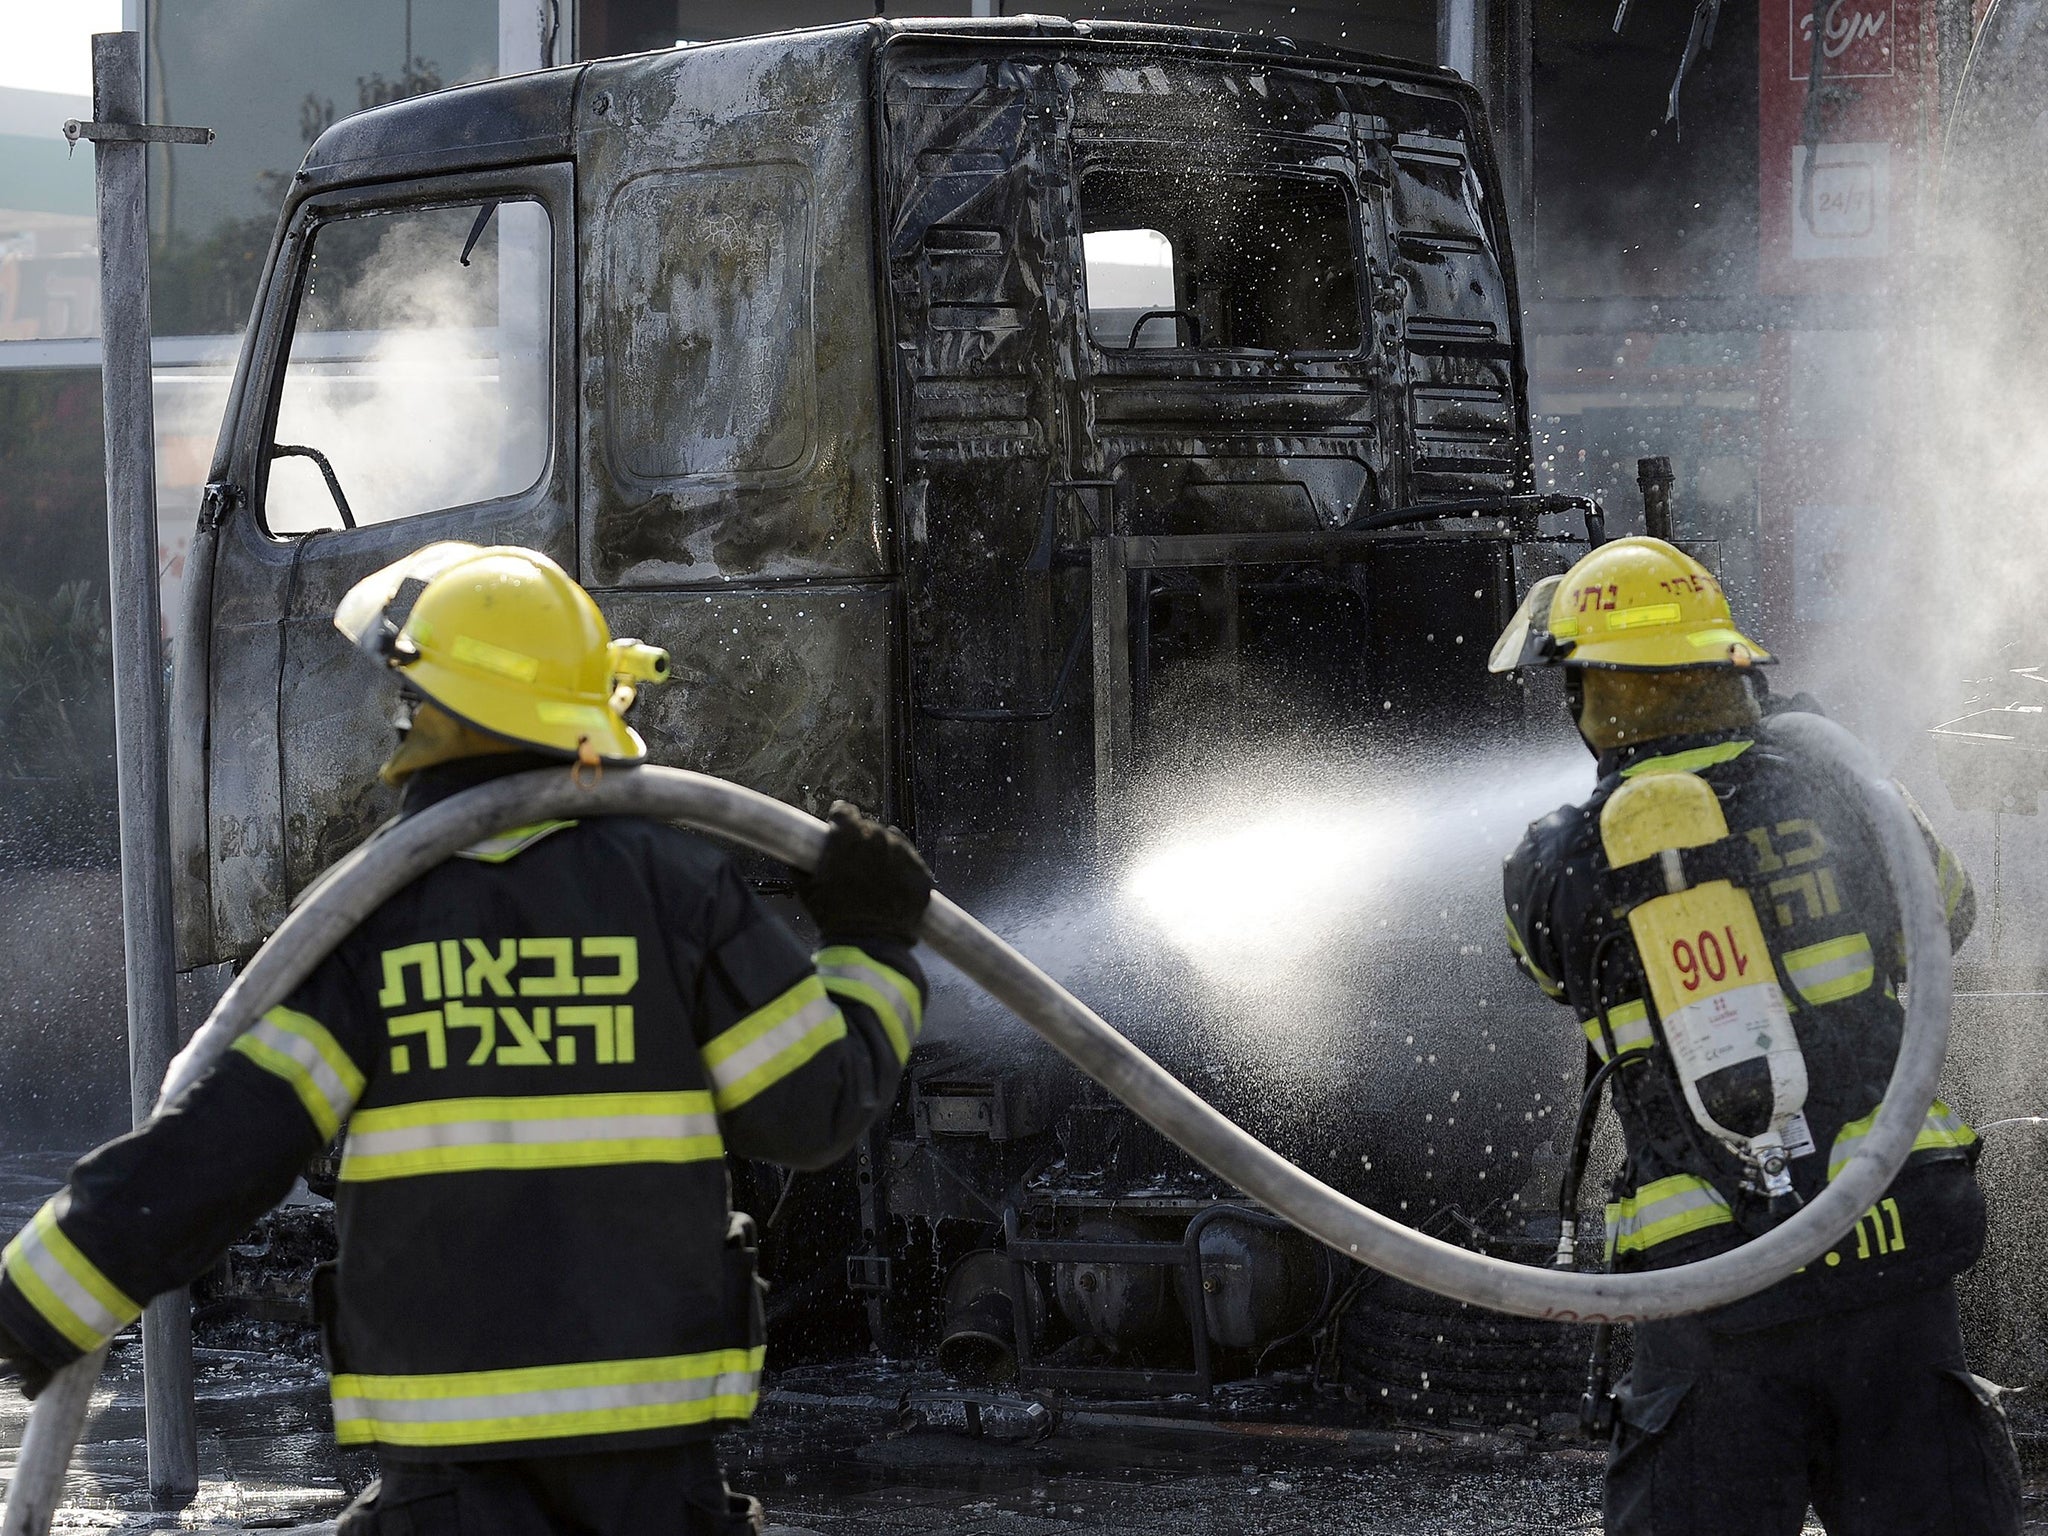 Israeli fire fighters extinguish vehicles destroyed by a rocket fired from the Gaza Strip in the city of Ashdod